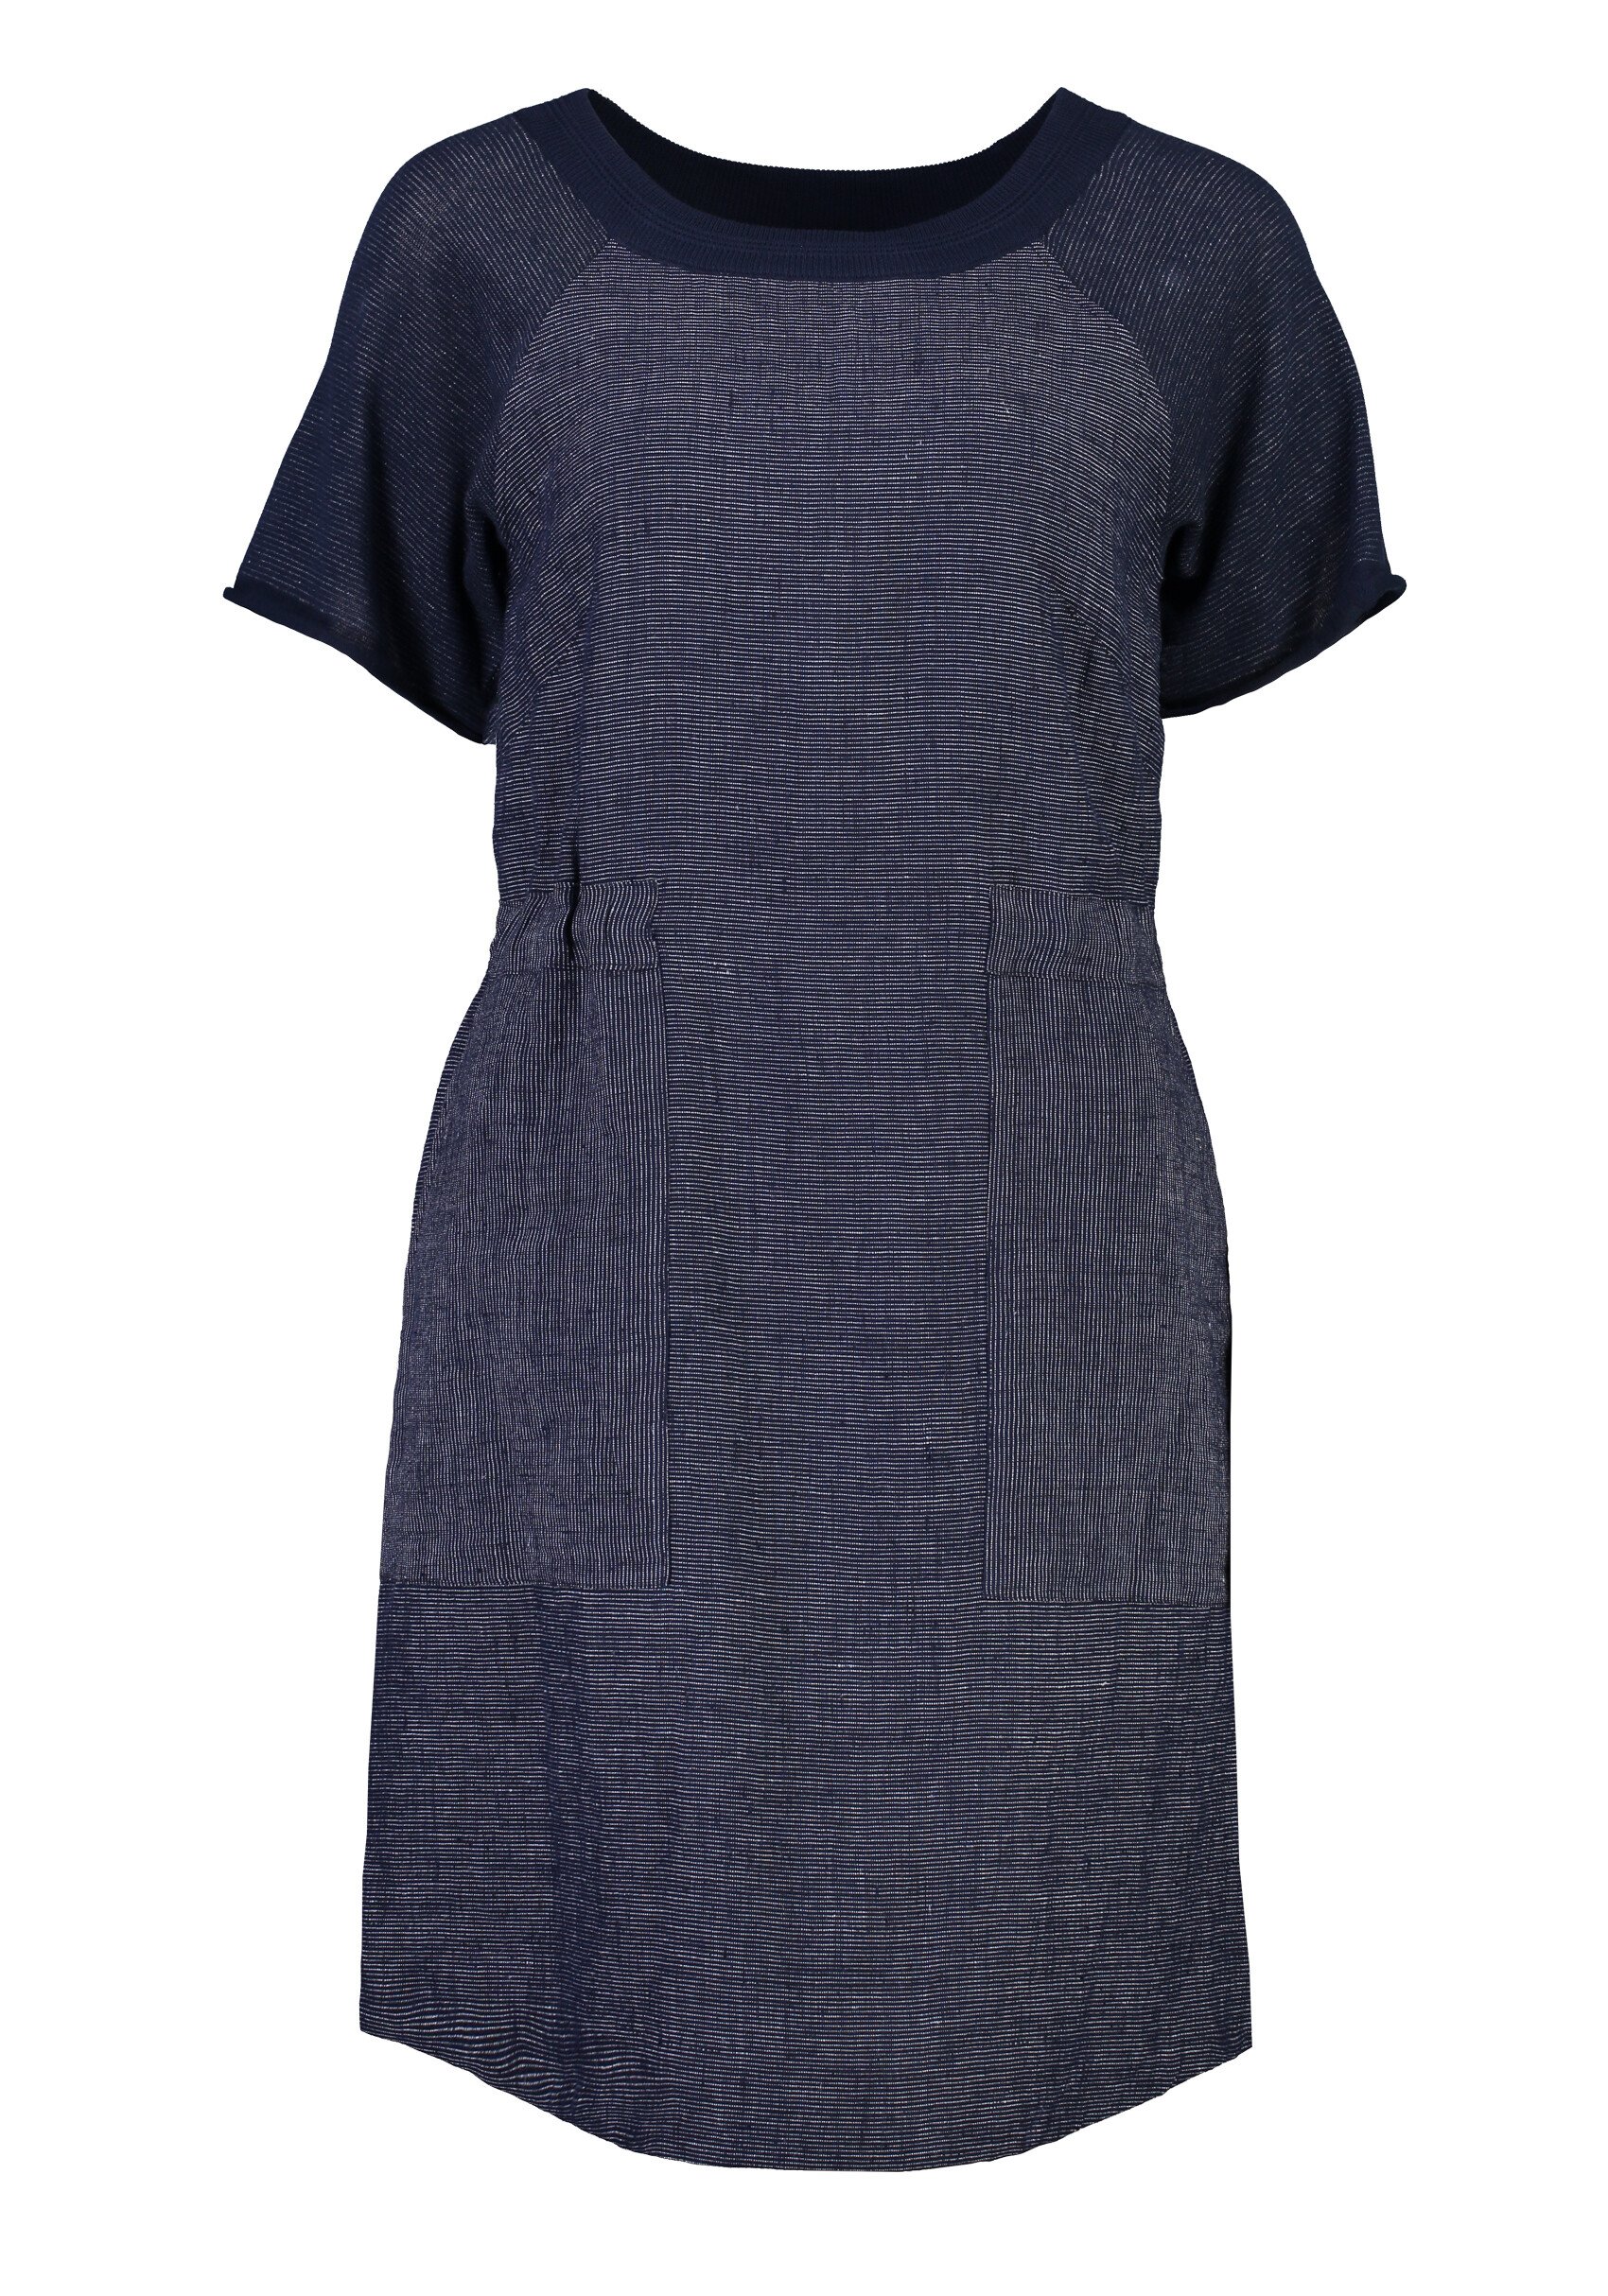 LINEN DRESS (NAVY)- STANDARD ISSUE SP20 Boxing Day Sale